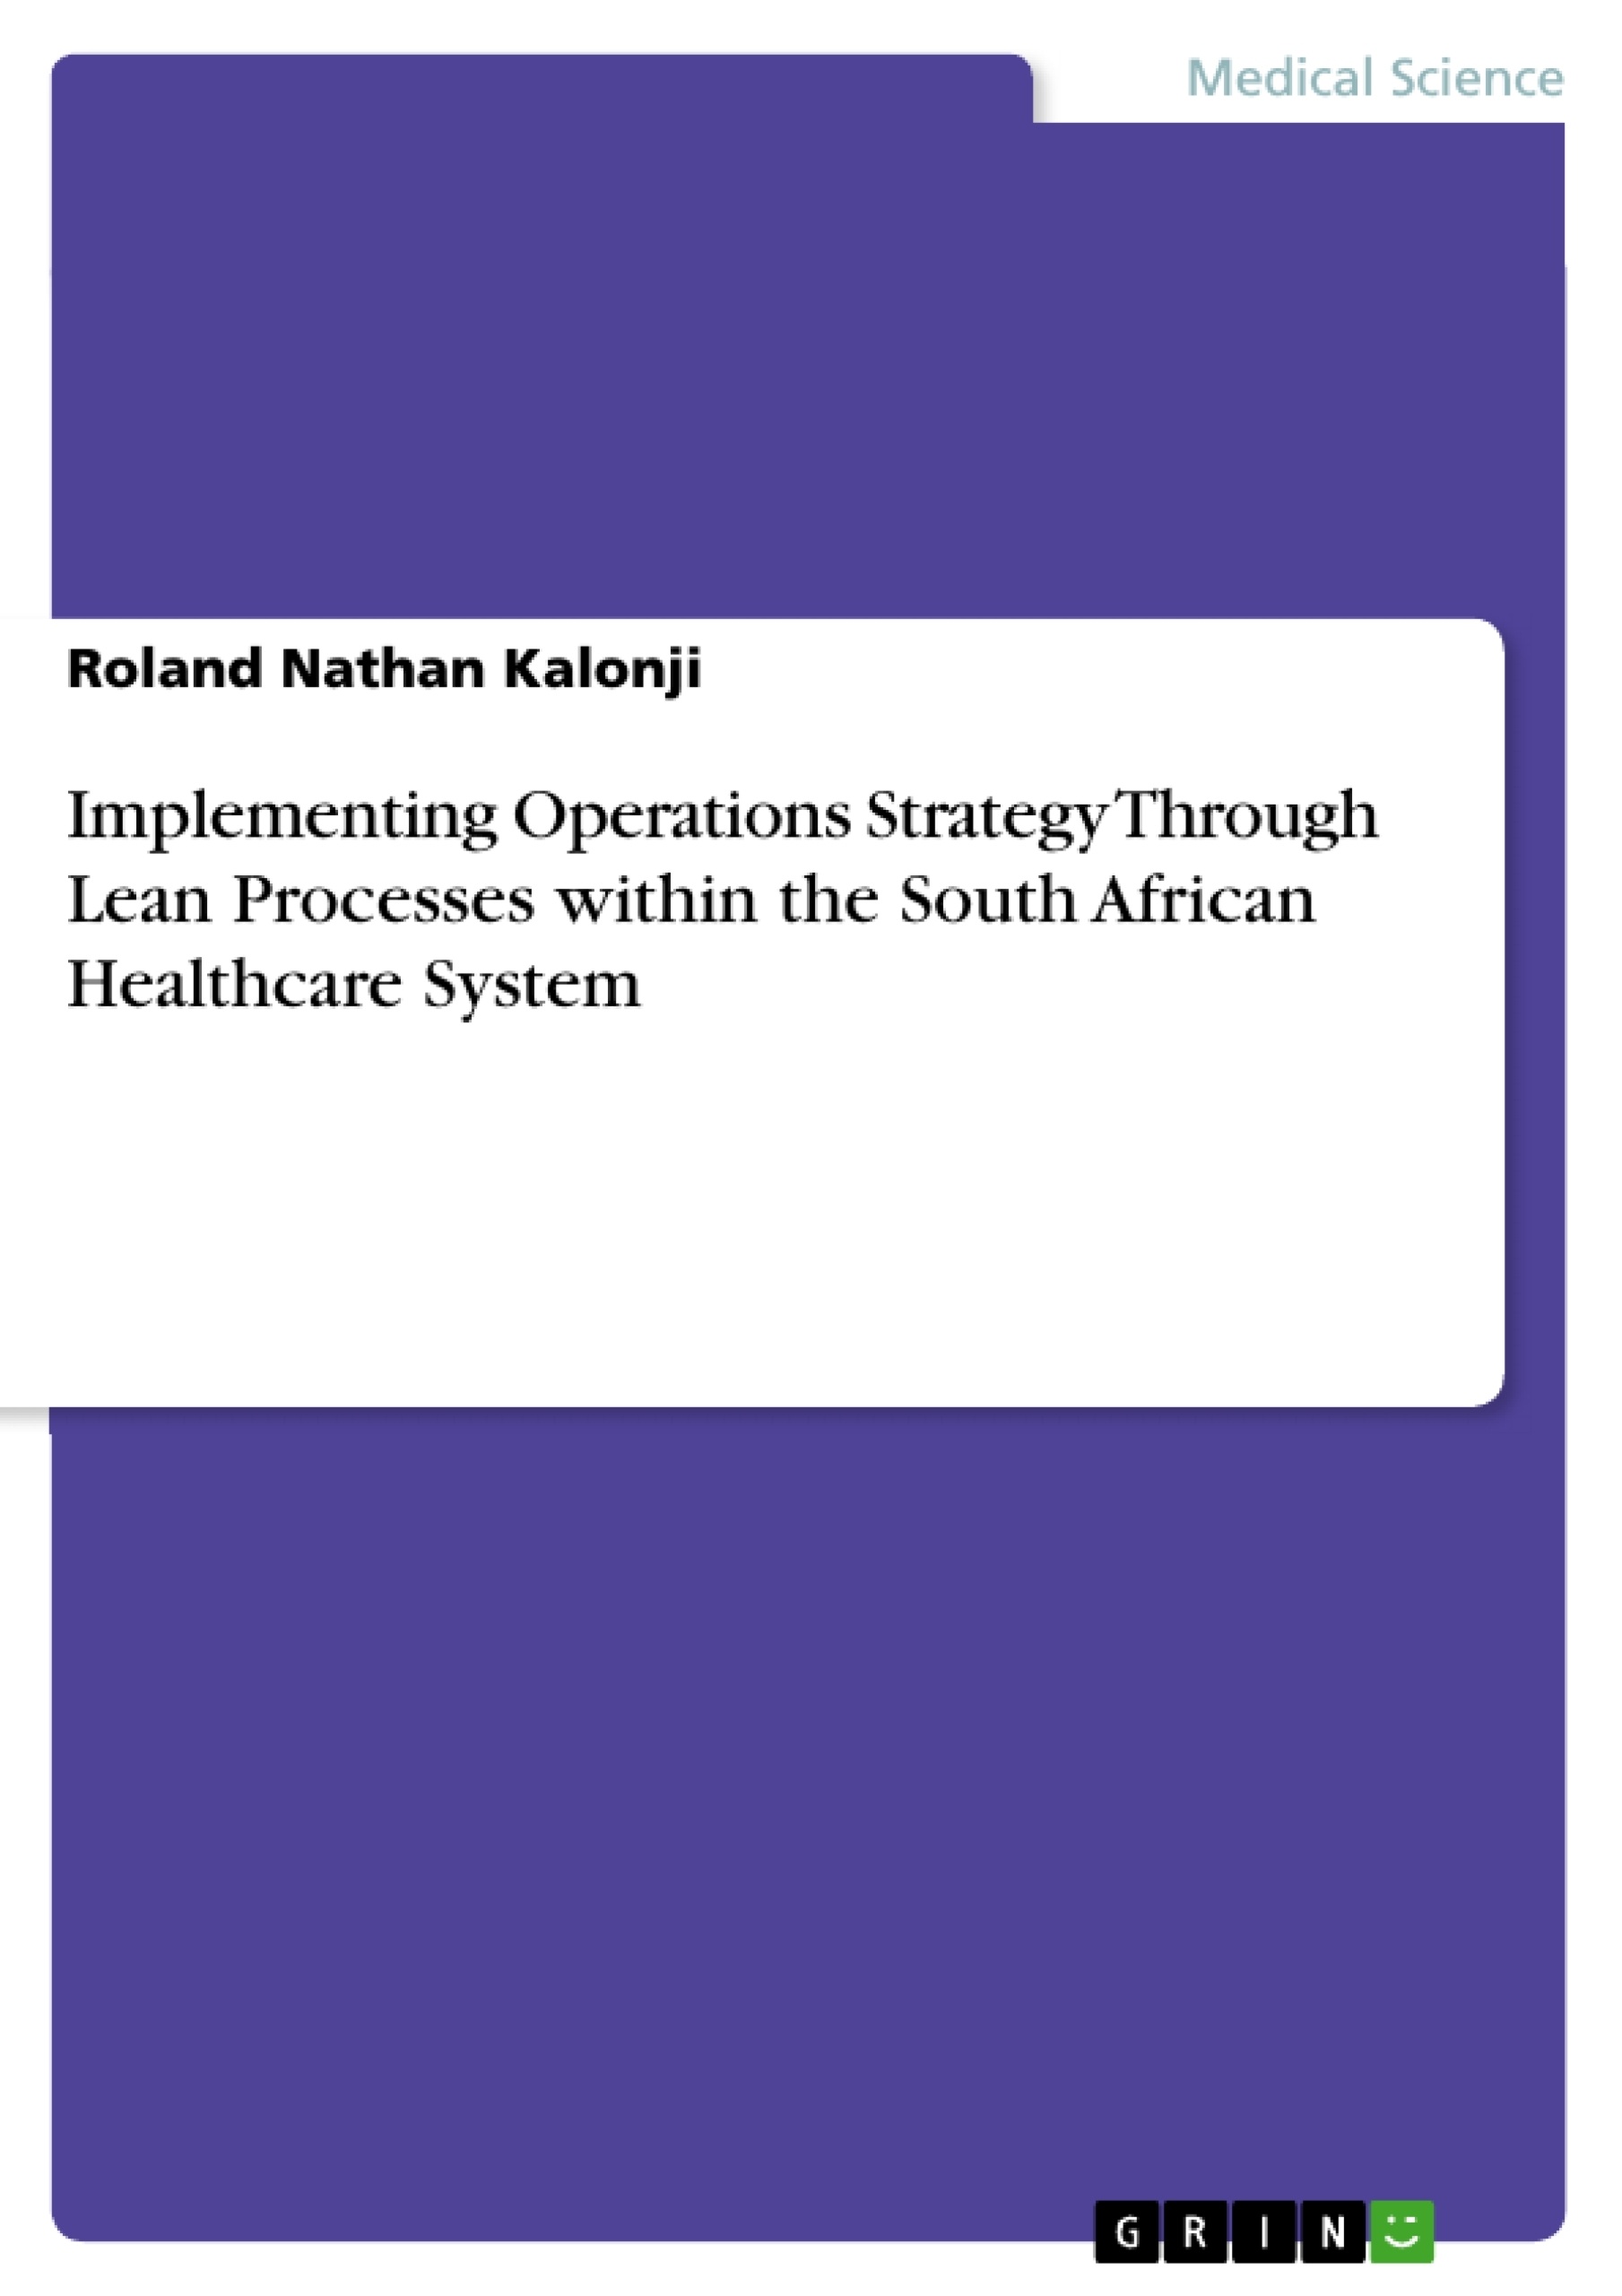 Titre: Implementing Operations Strategy Through Lean Processes within the South African Healthcare System